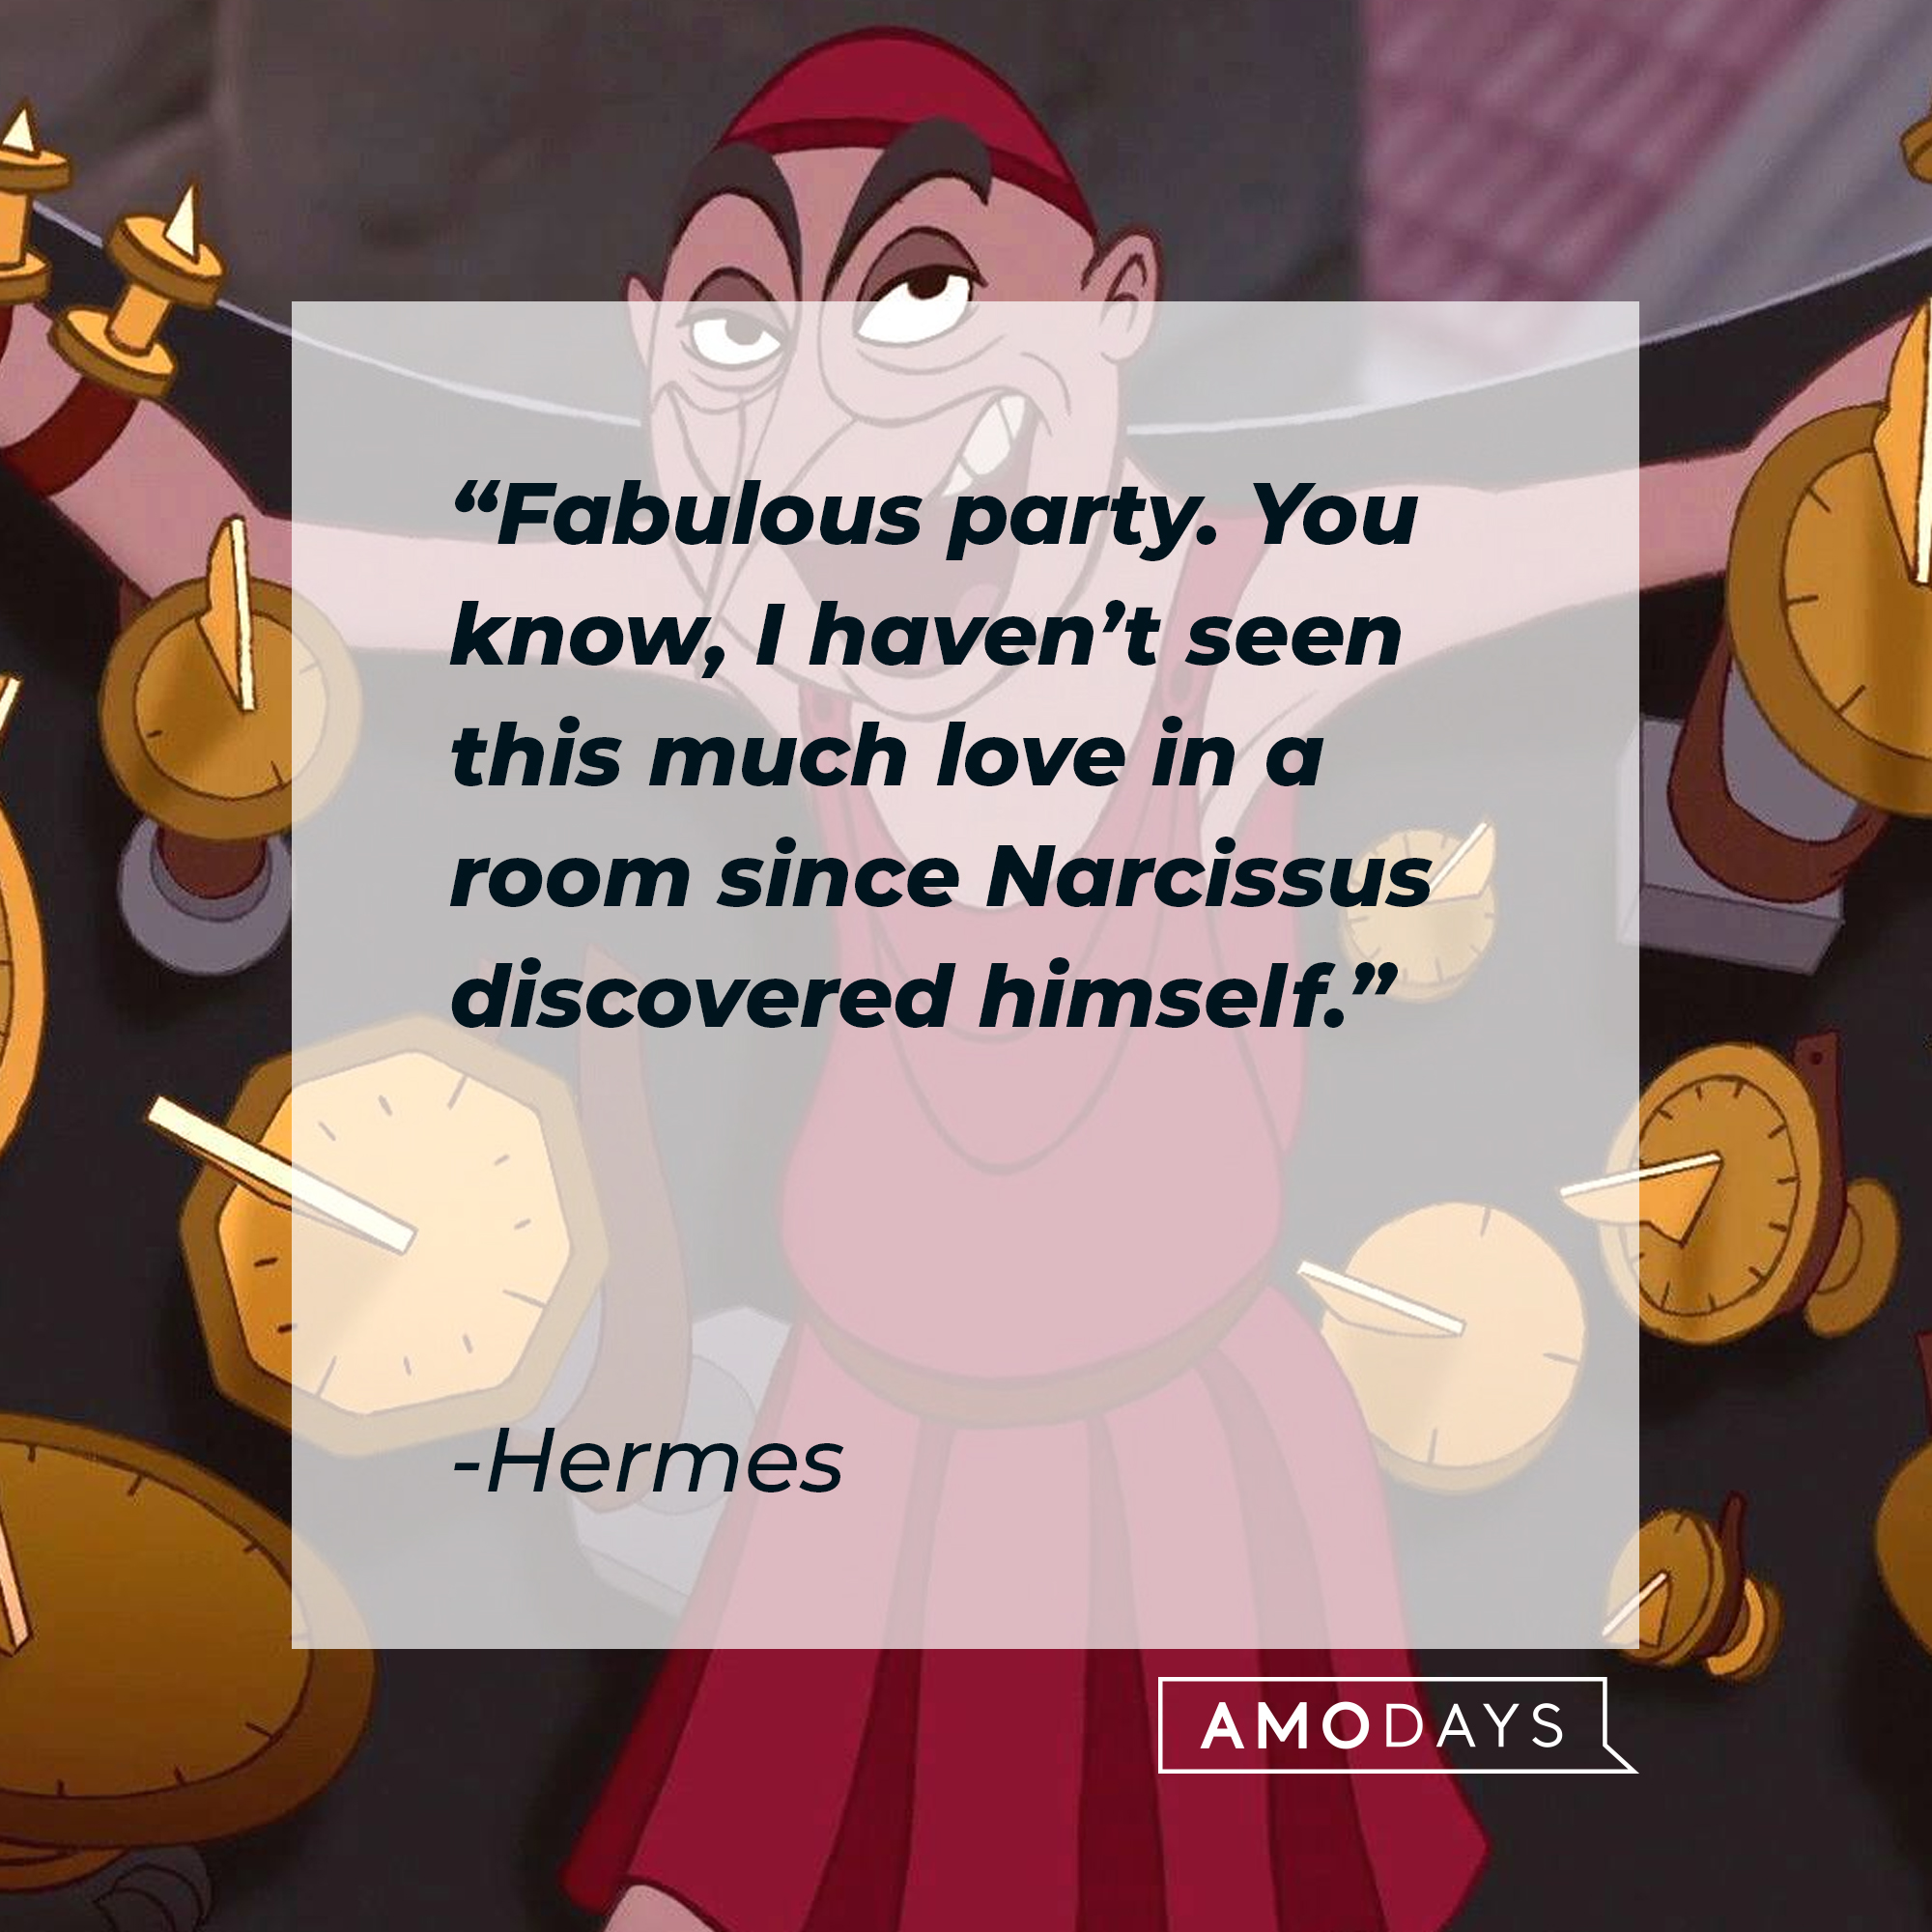 A character from the "Hercules" movie with Hermes’s quote: “Fabulous party. You know, I haven’t seen this much love in a room since Narcissus discovered himself.” | Source: Facebook.com/DisneyHercules